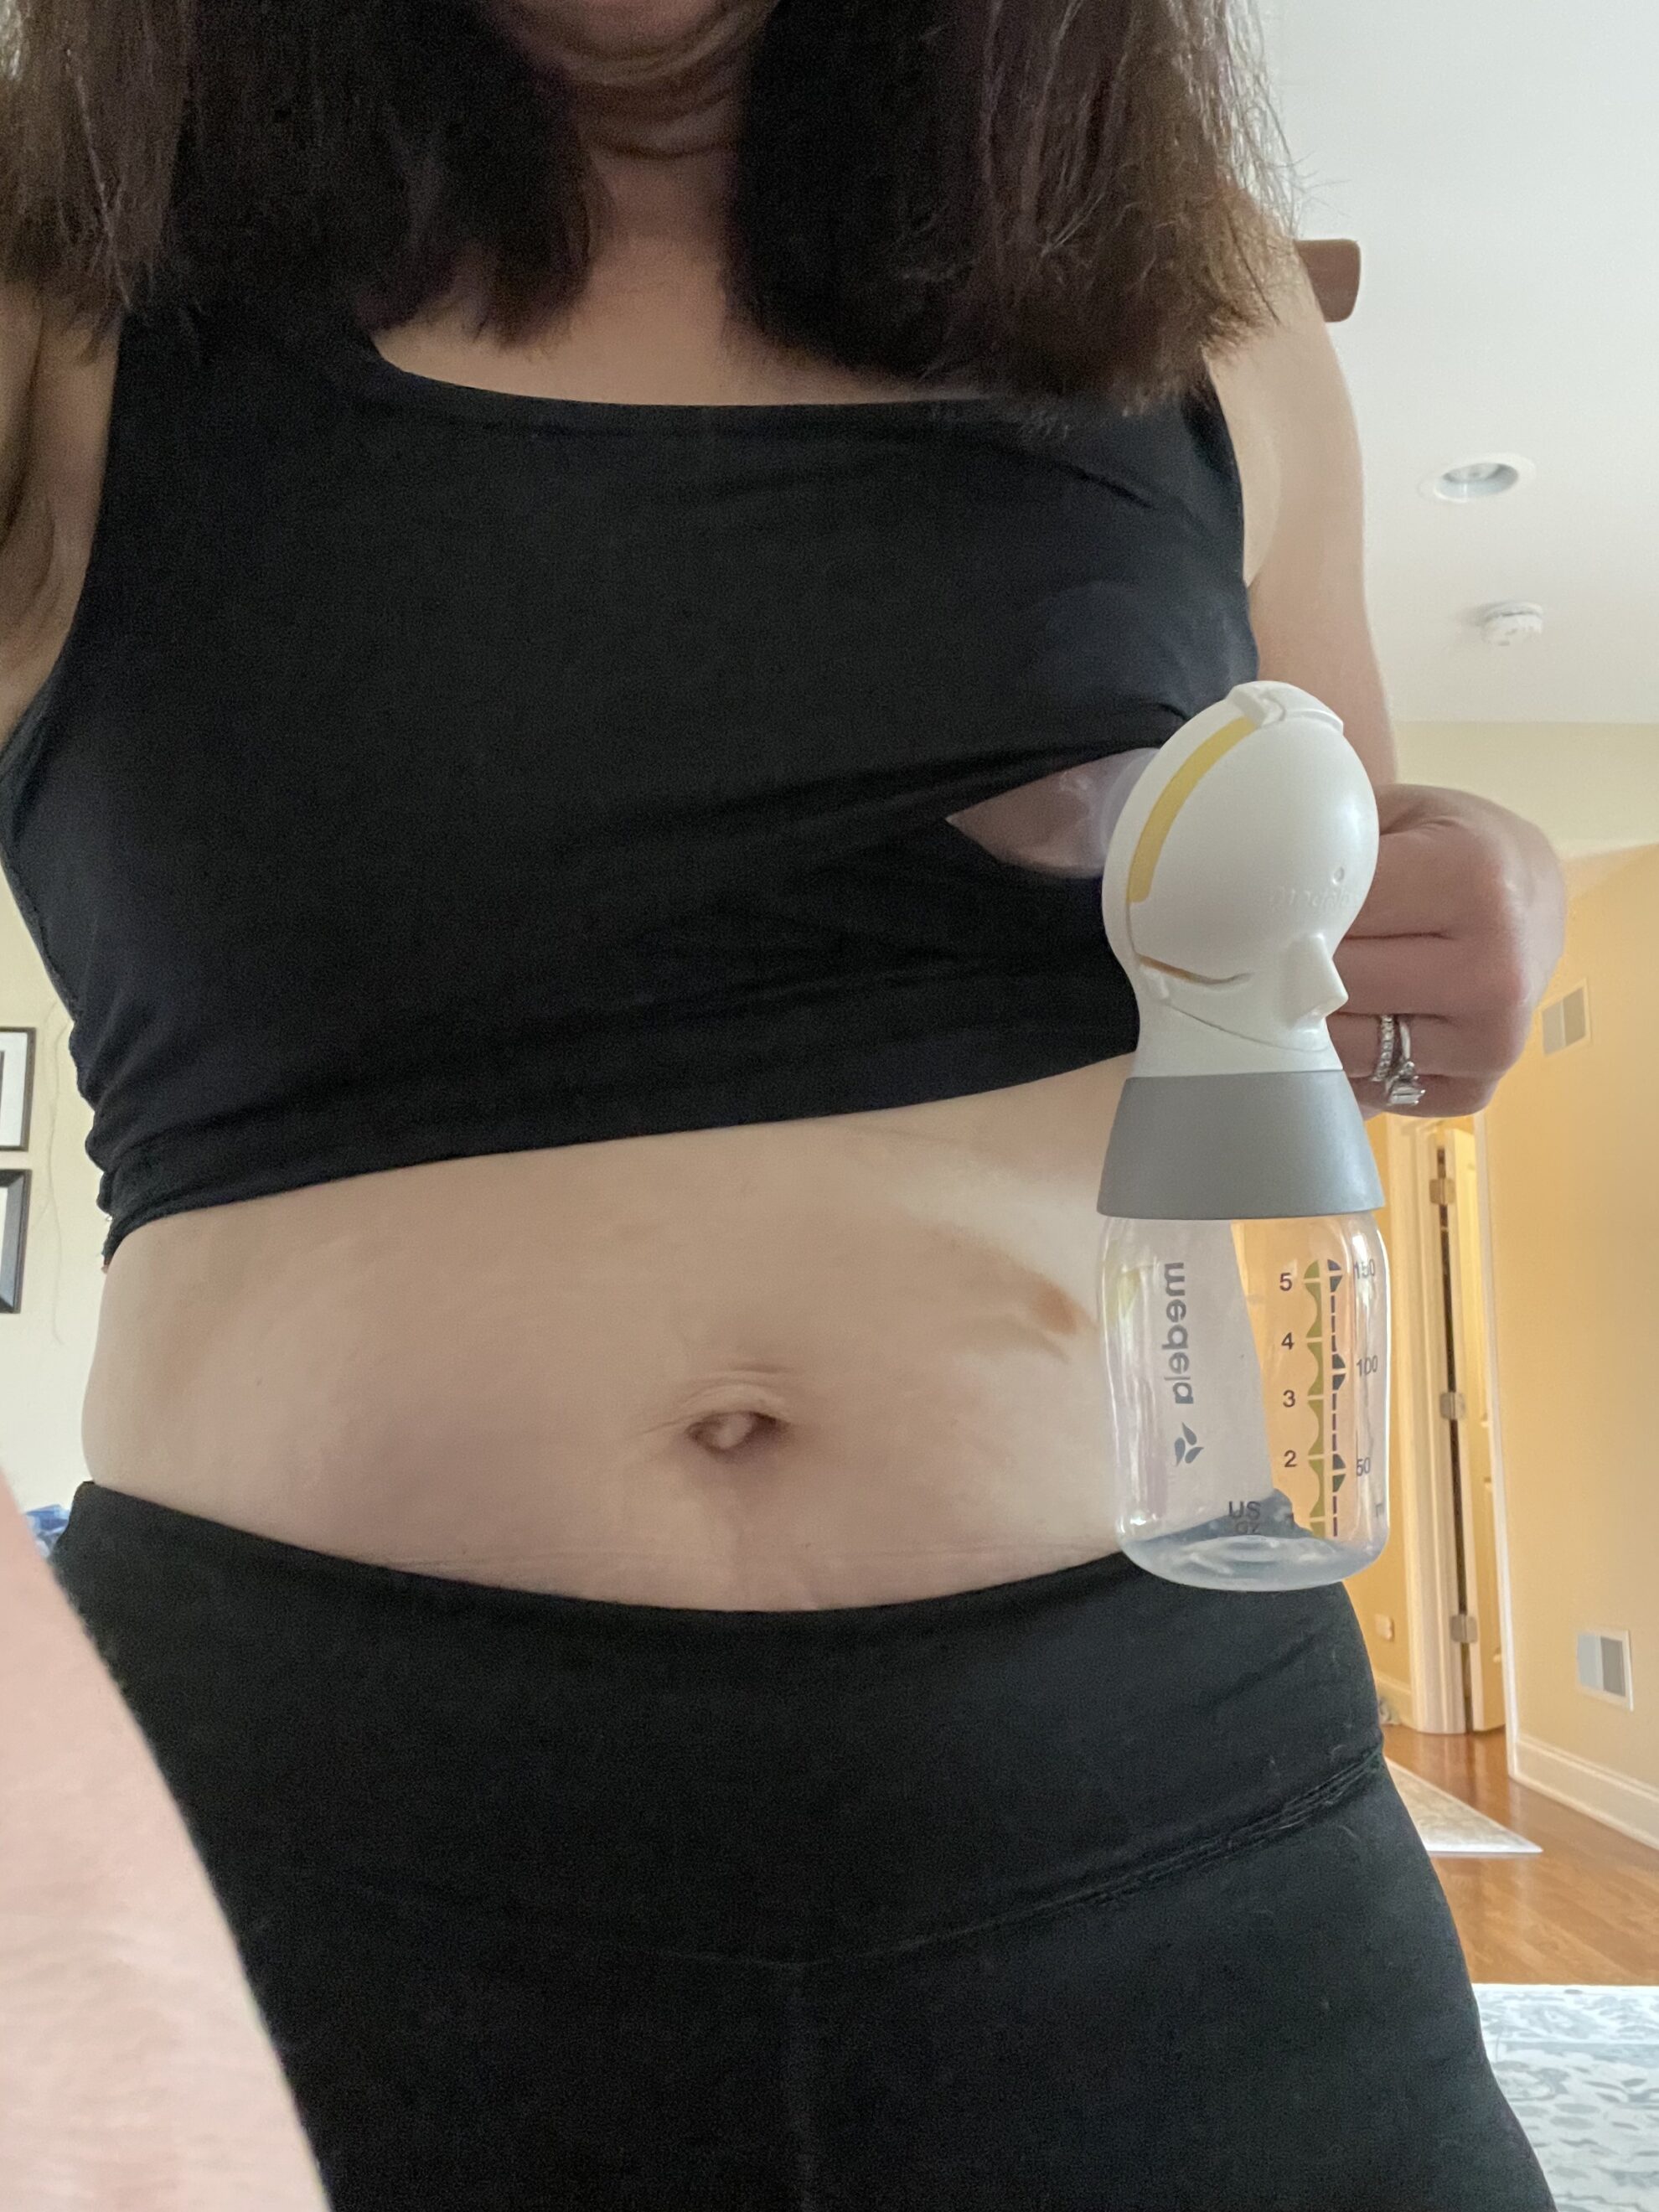 Hands free bra for spectra breast pump - July 2022 Babies